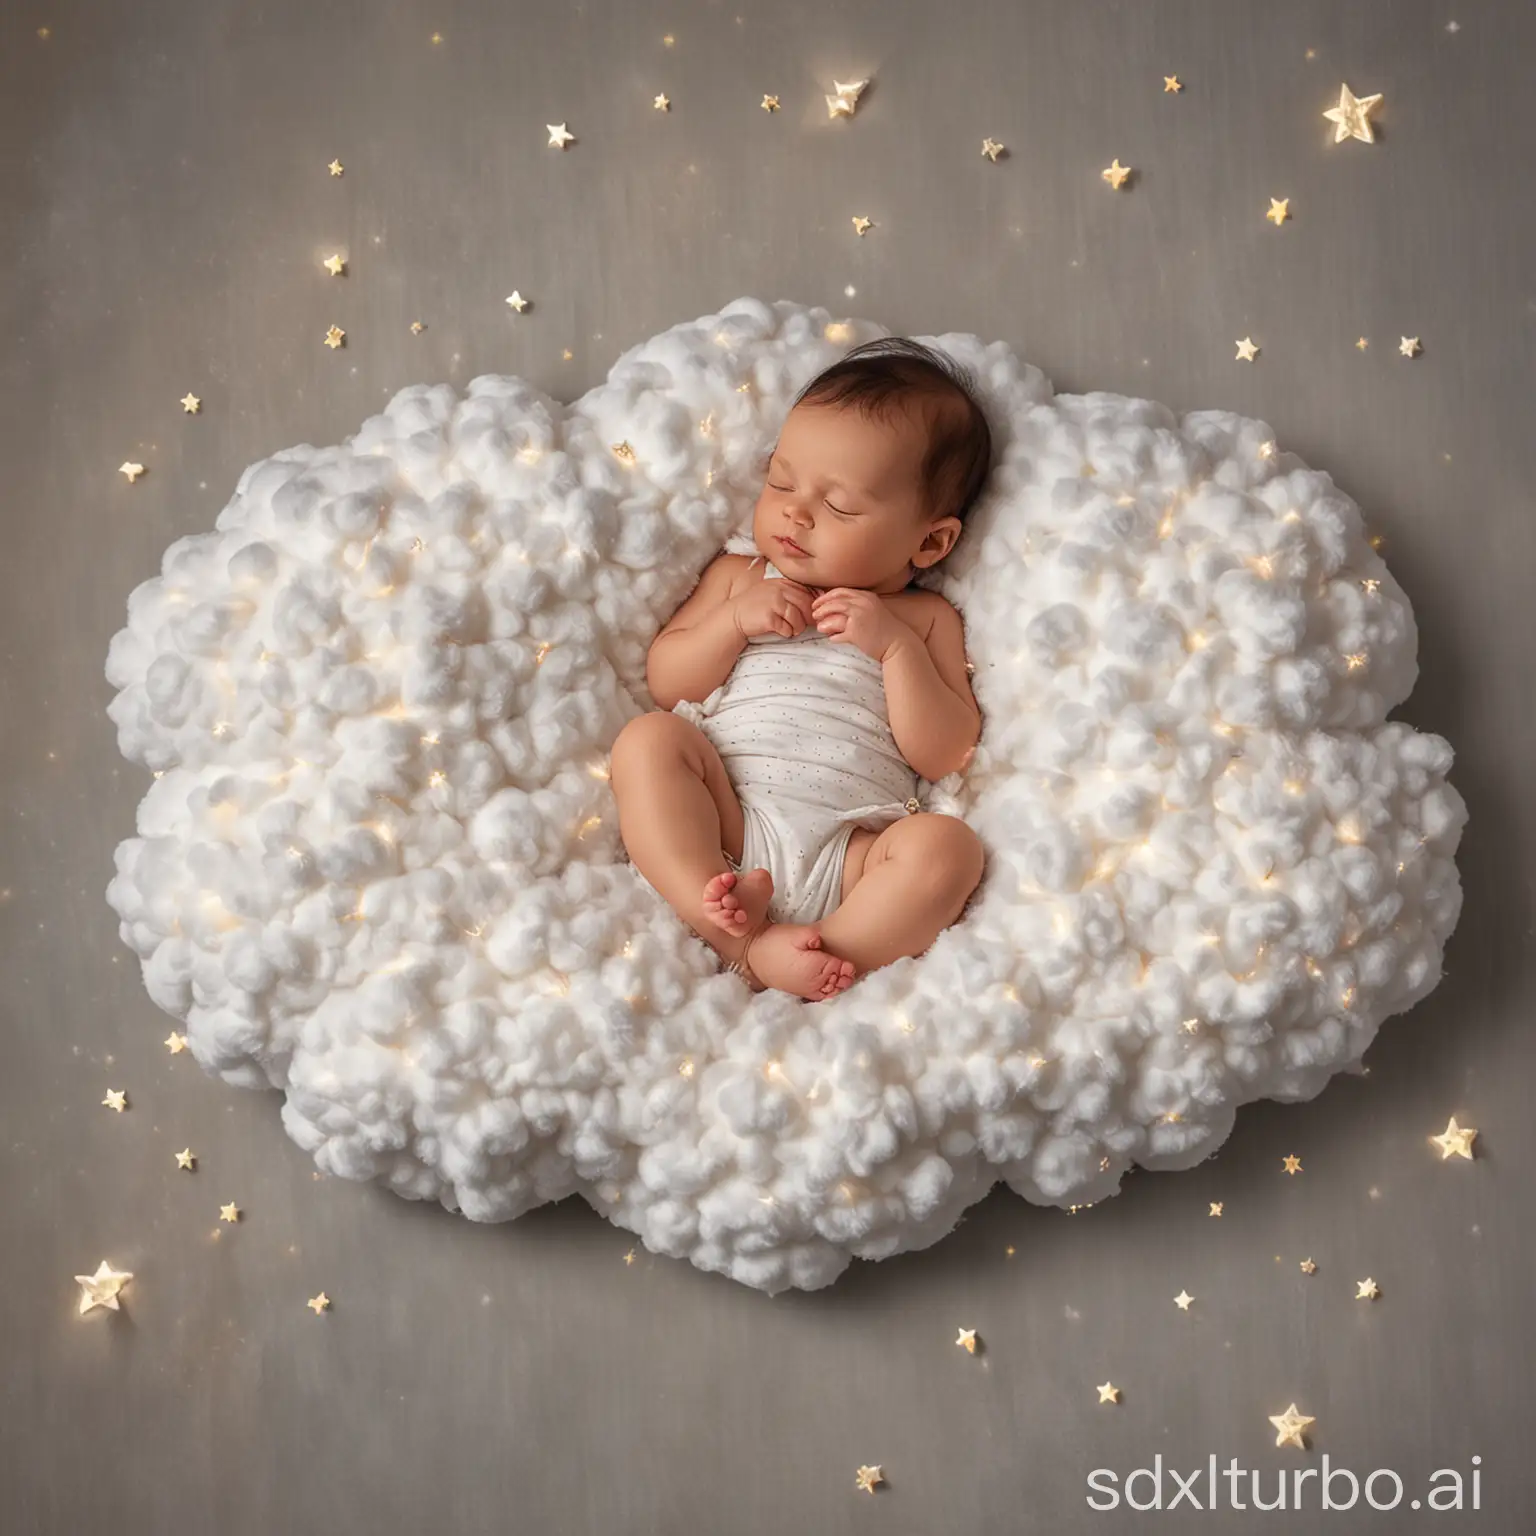 Das Baby lies on a soft, fluffy cloud pillow, that gently floats in the sky. Little star sparks dance around the cloud, and a soft lullaby of the stars lets the baby fall asleep.